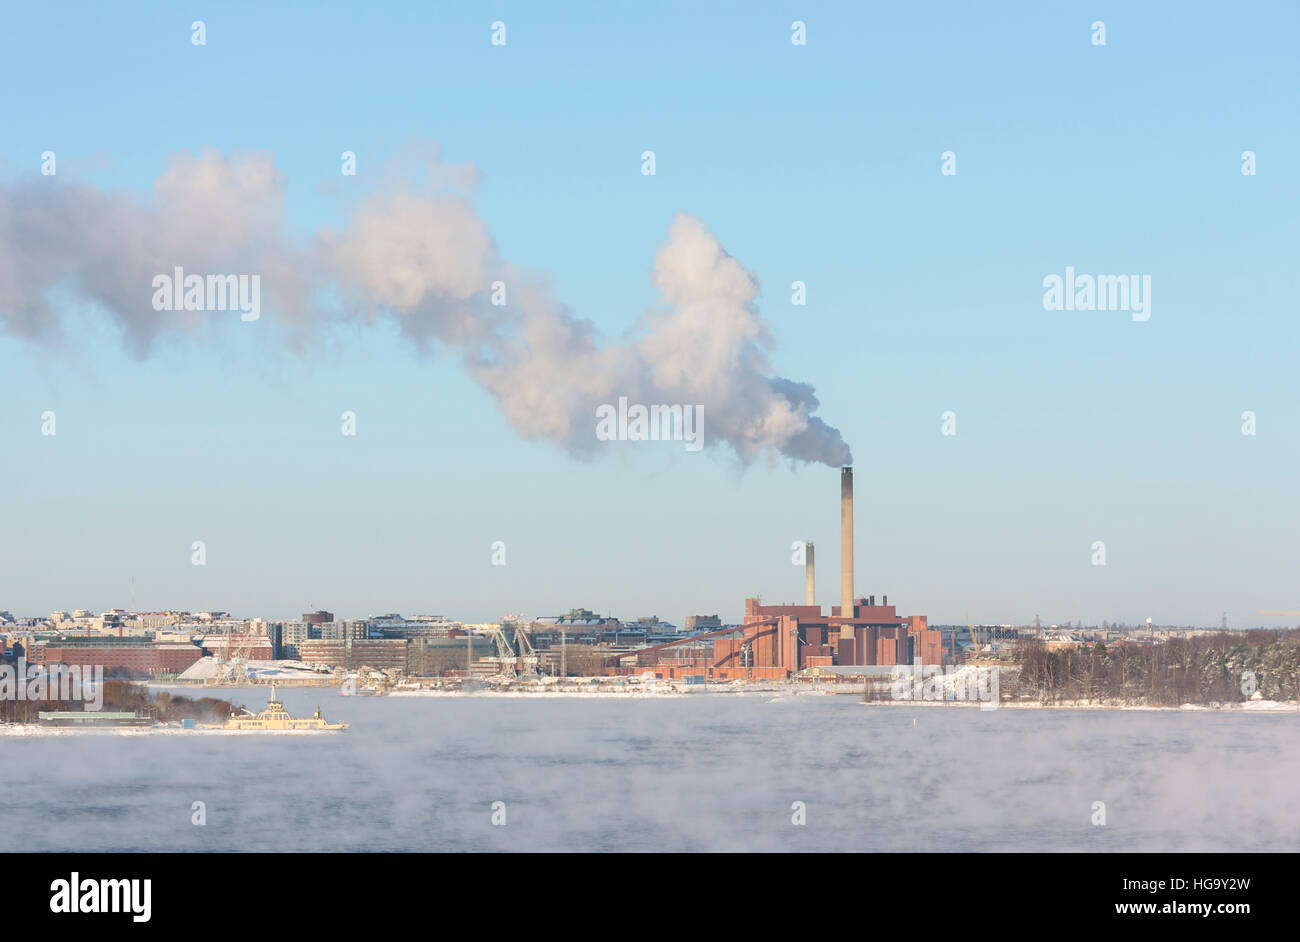 Factory with a tall smoking chimney behind vaporing water at winter Stock Photo